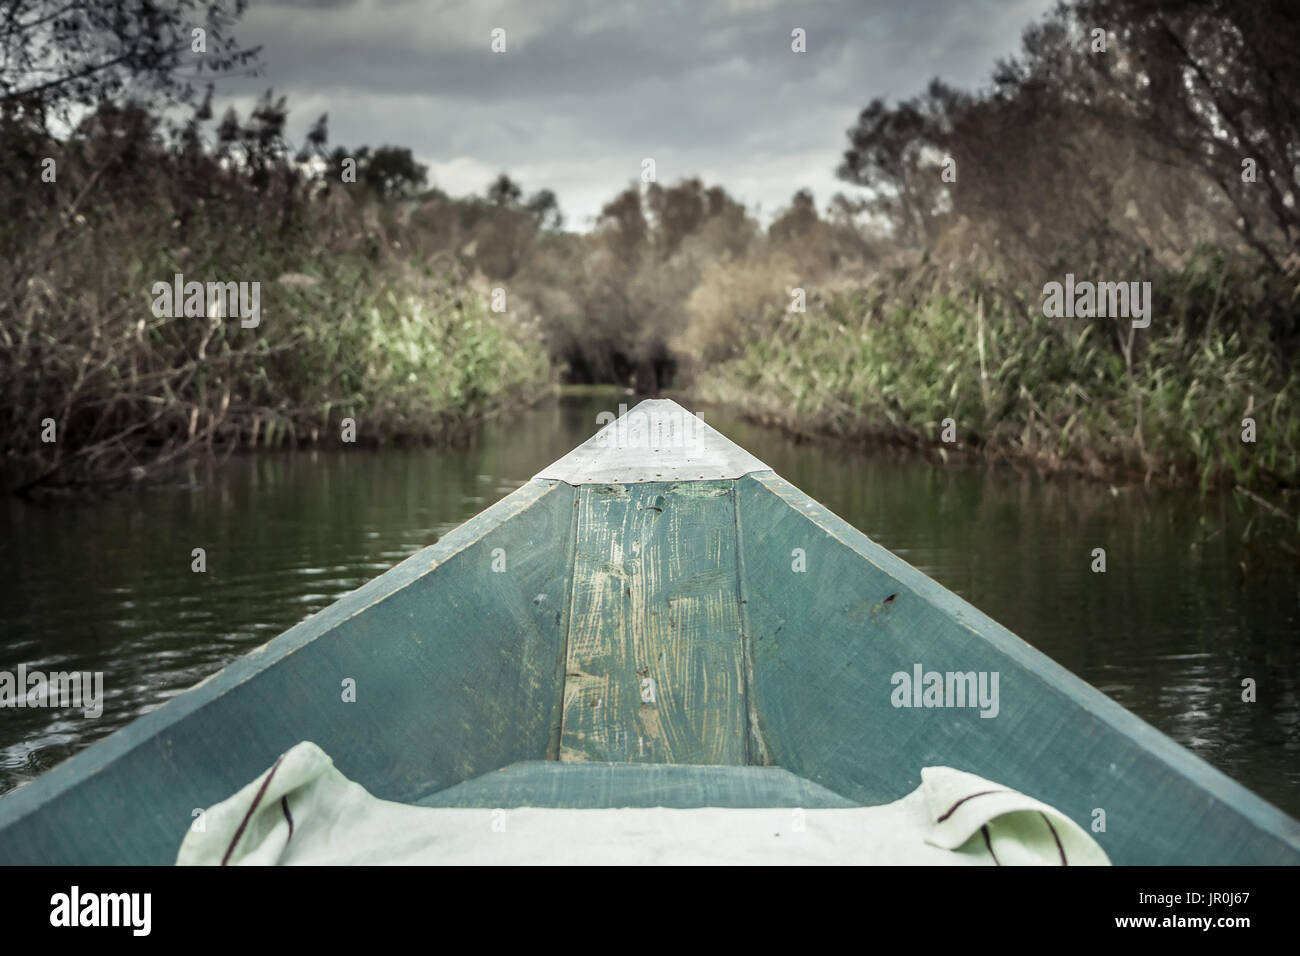 Bow of boat with forward direction towards bank on river in overcast day with dramatic sky symbolizing way forward Stock Photo